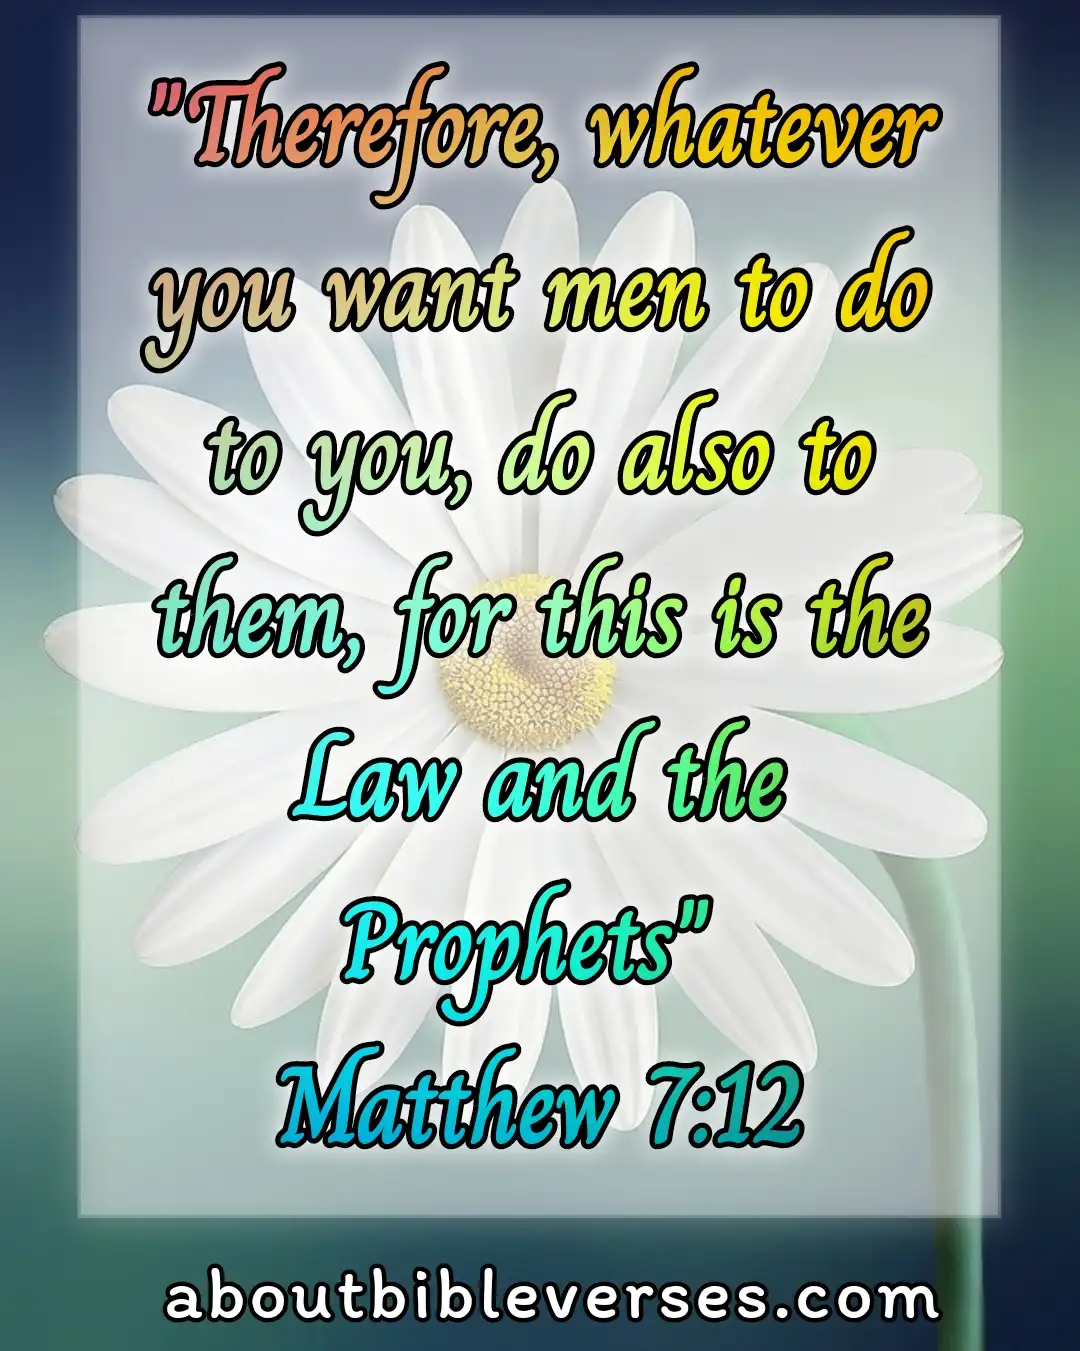 Bible Verses About Morality And Ethics (Matthew 7:12)